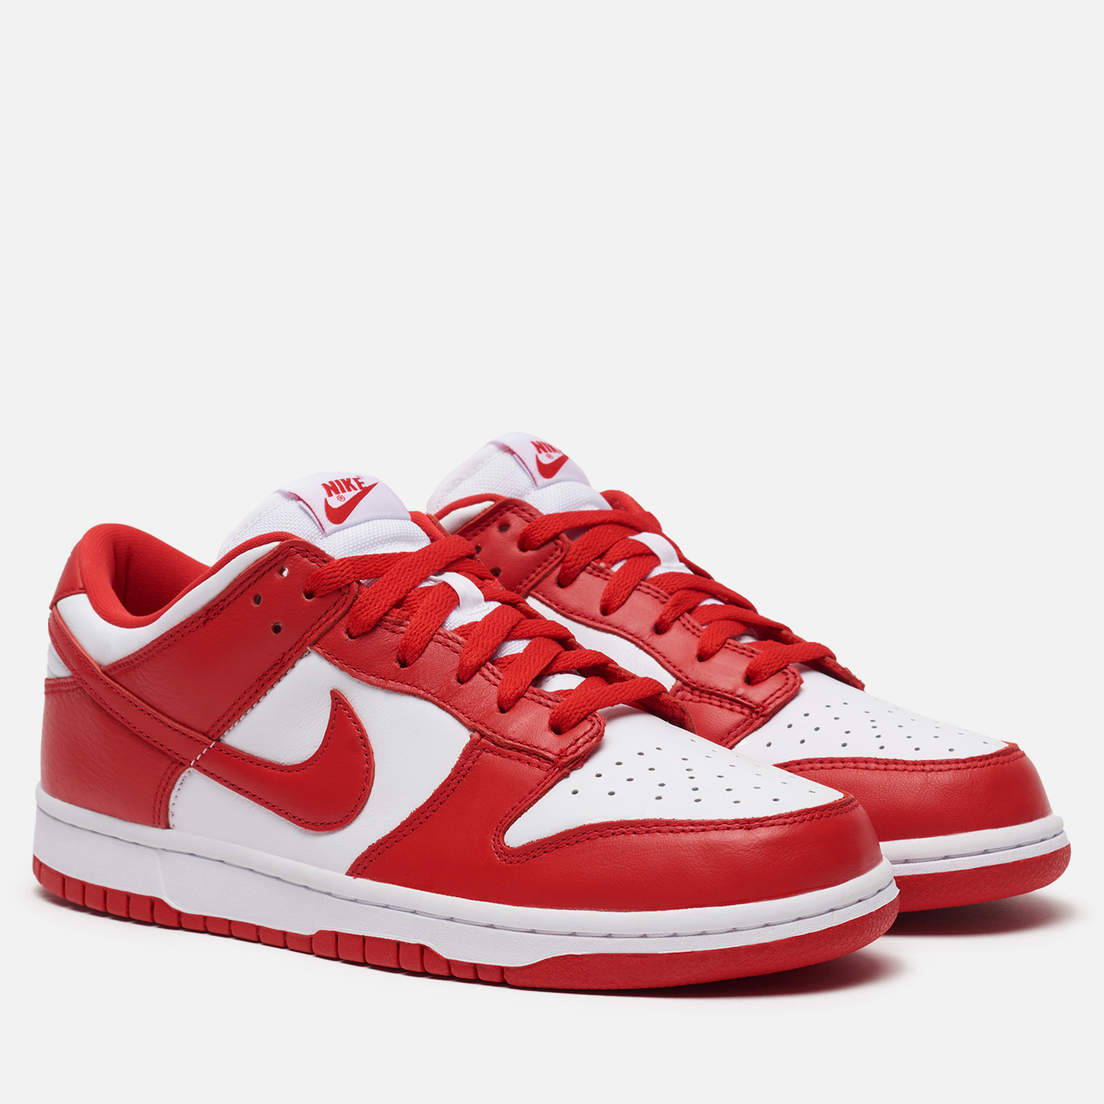 nike dunk low sp white & university red